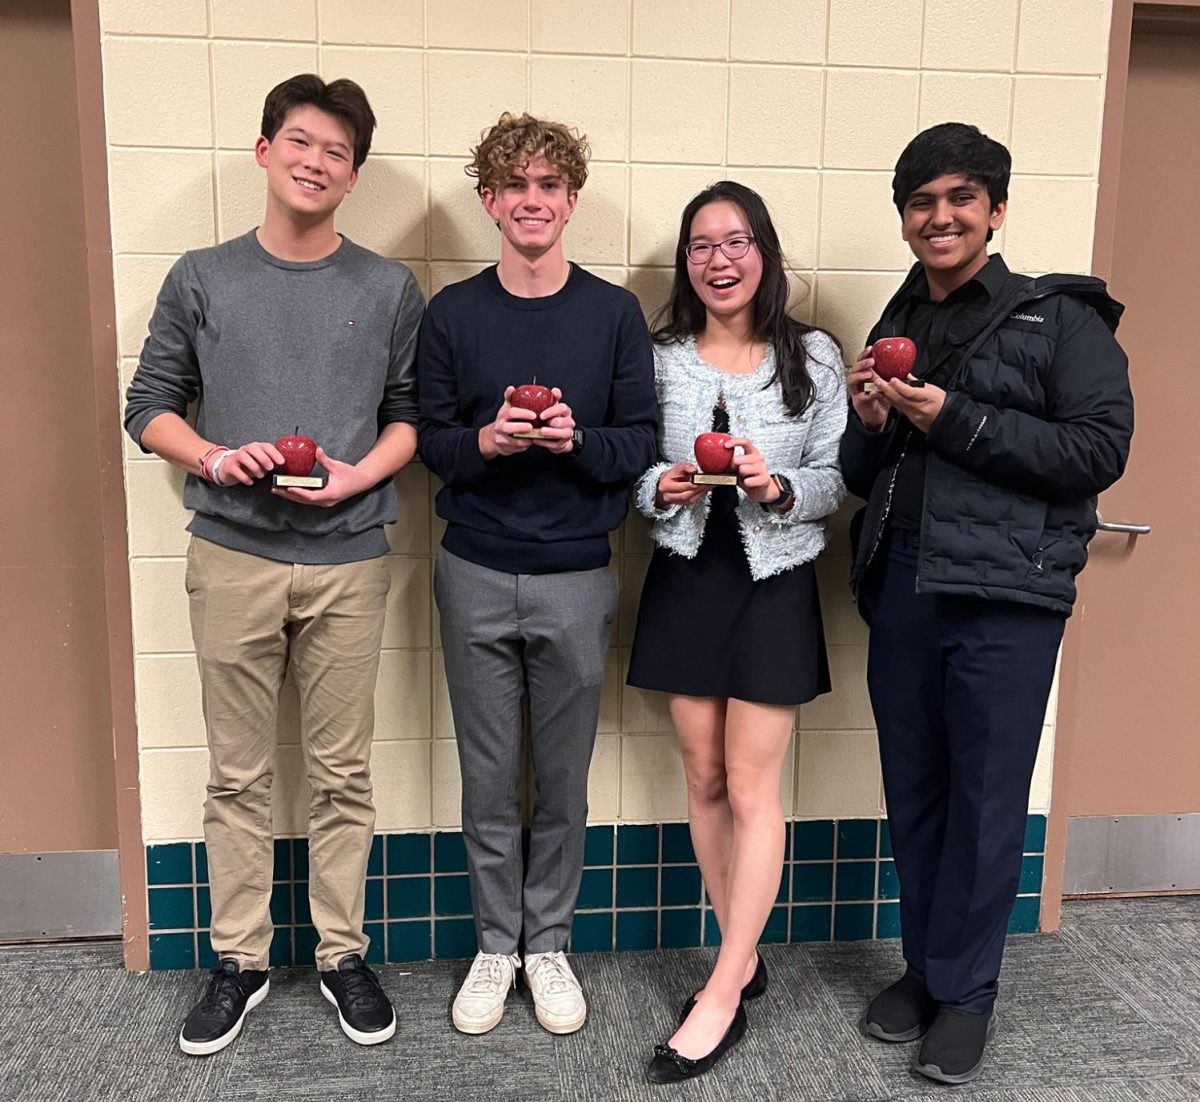 HOW ‘BOUT THEM APPLES. Debaters Henry Choi, David Schumacher, Deling Chen and Zain Kizilbash pose with their Minneapple trophies. Kizilbash had mixed feelings about the “...draining but overall worthwhile” tournament.